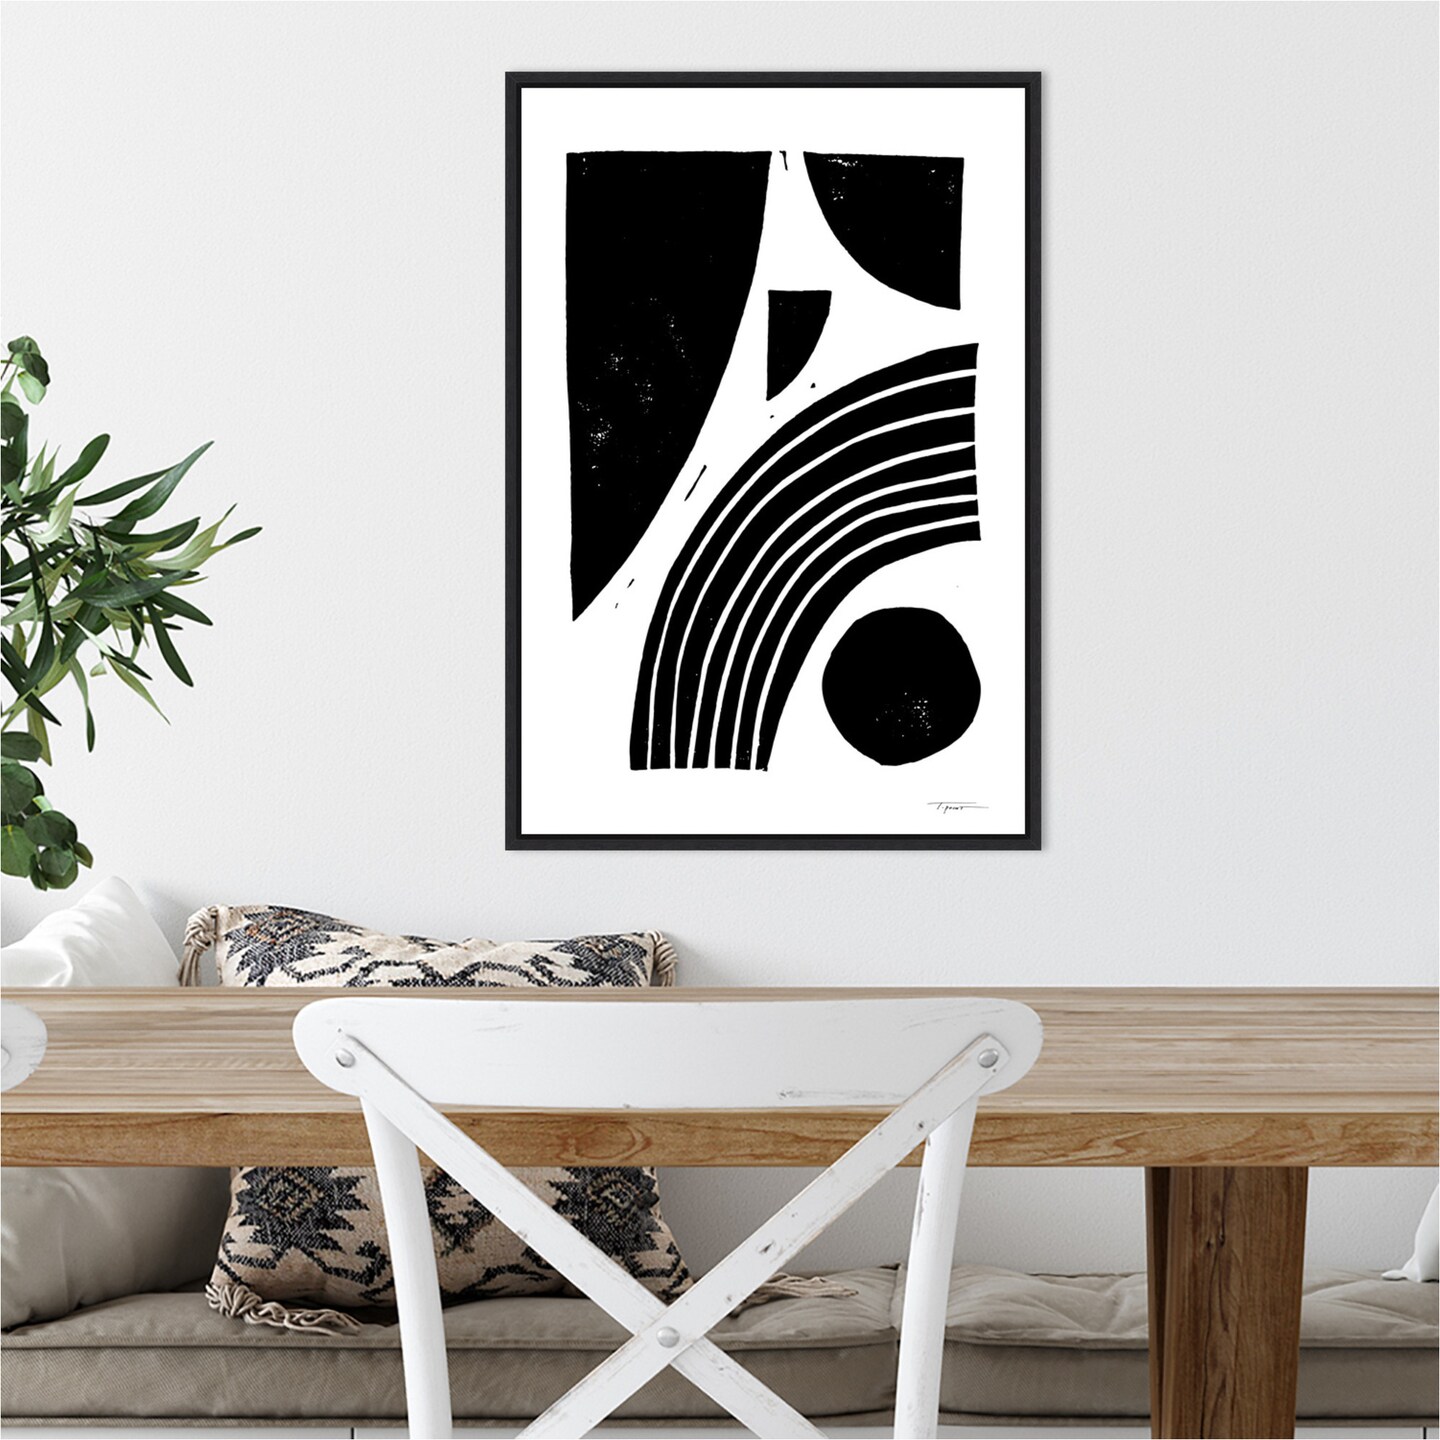 Reflecting Shapes Black by Statement Goods 16-in. W x 23-in. H. Canvas Wall Art Print Framed in Black